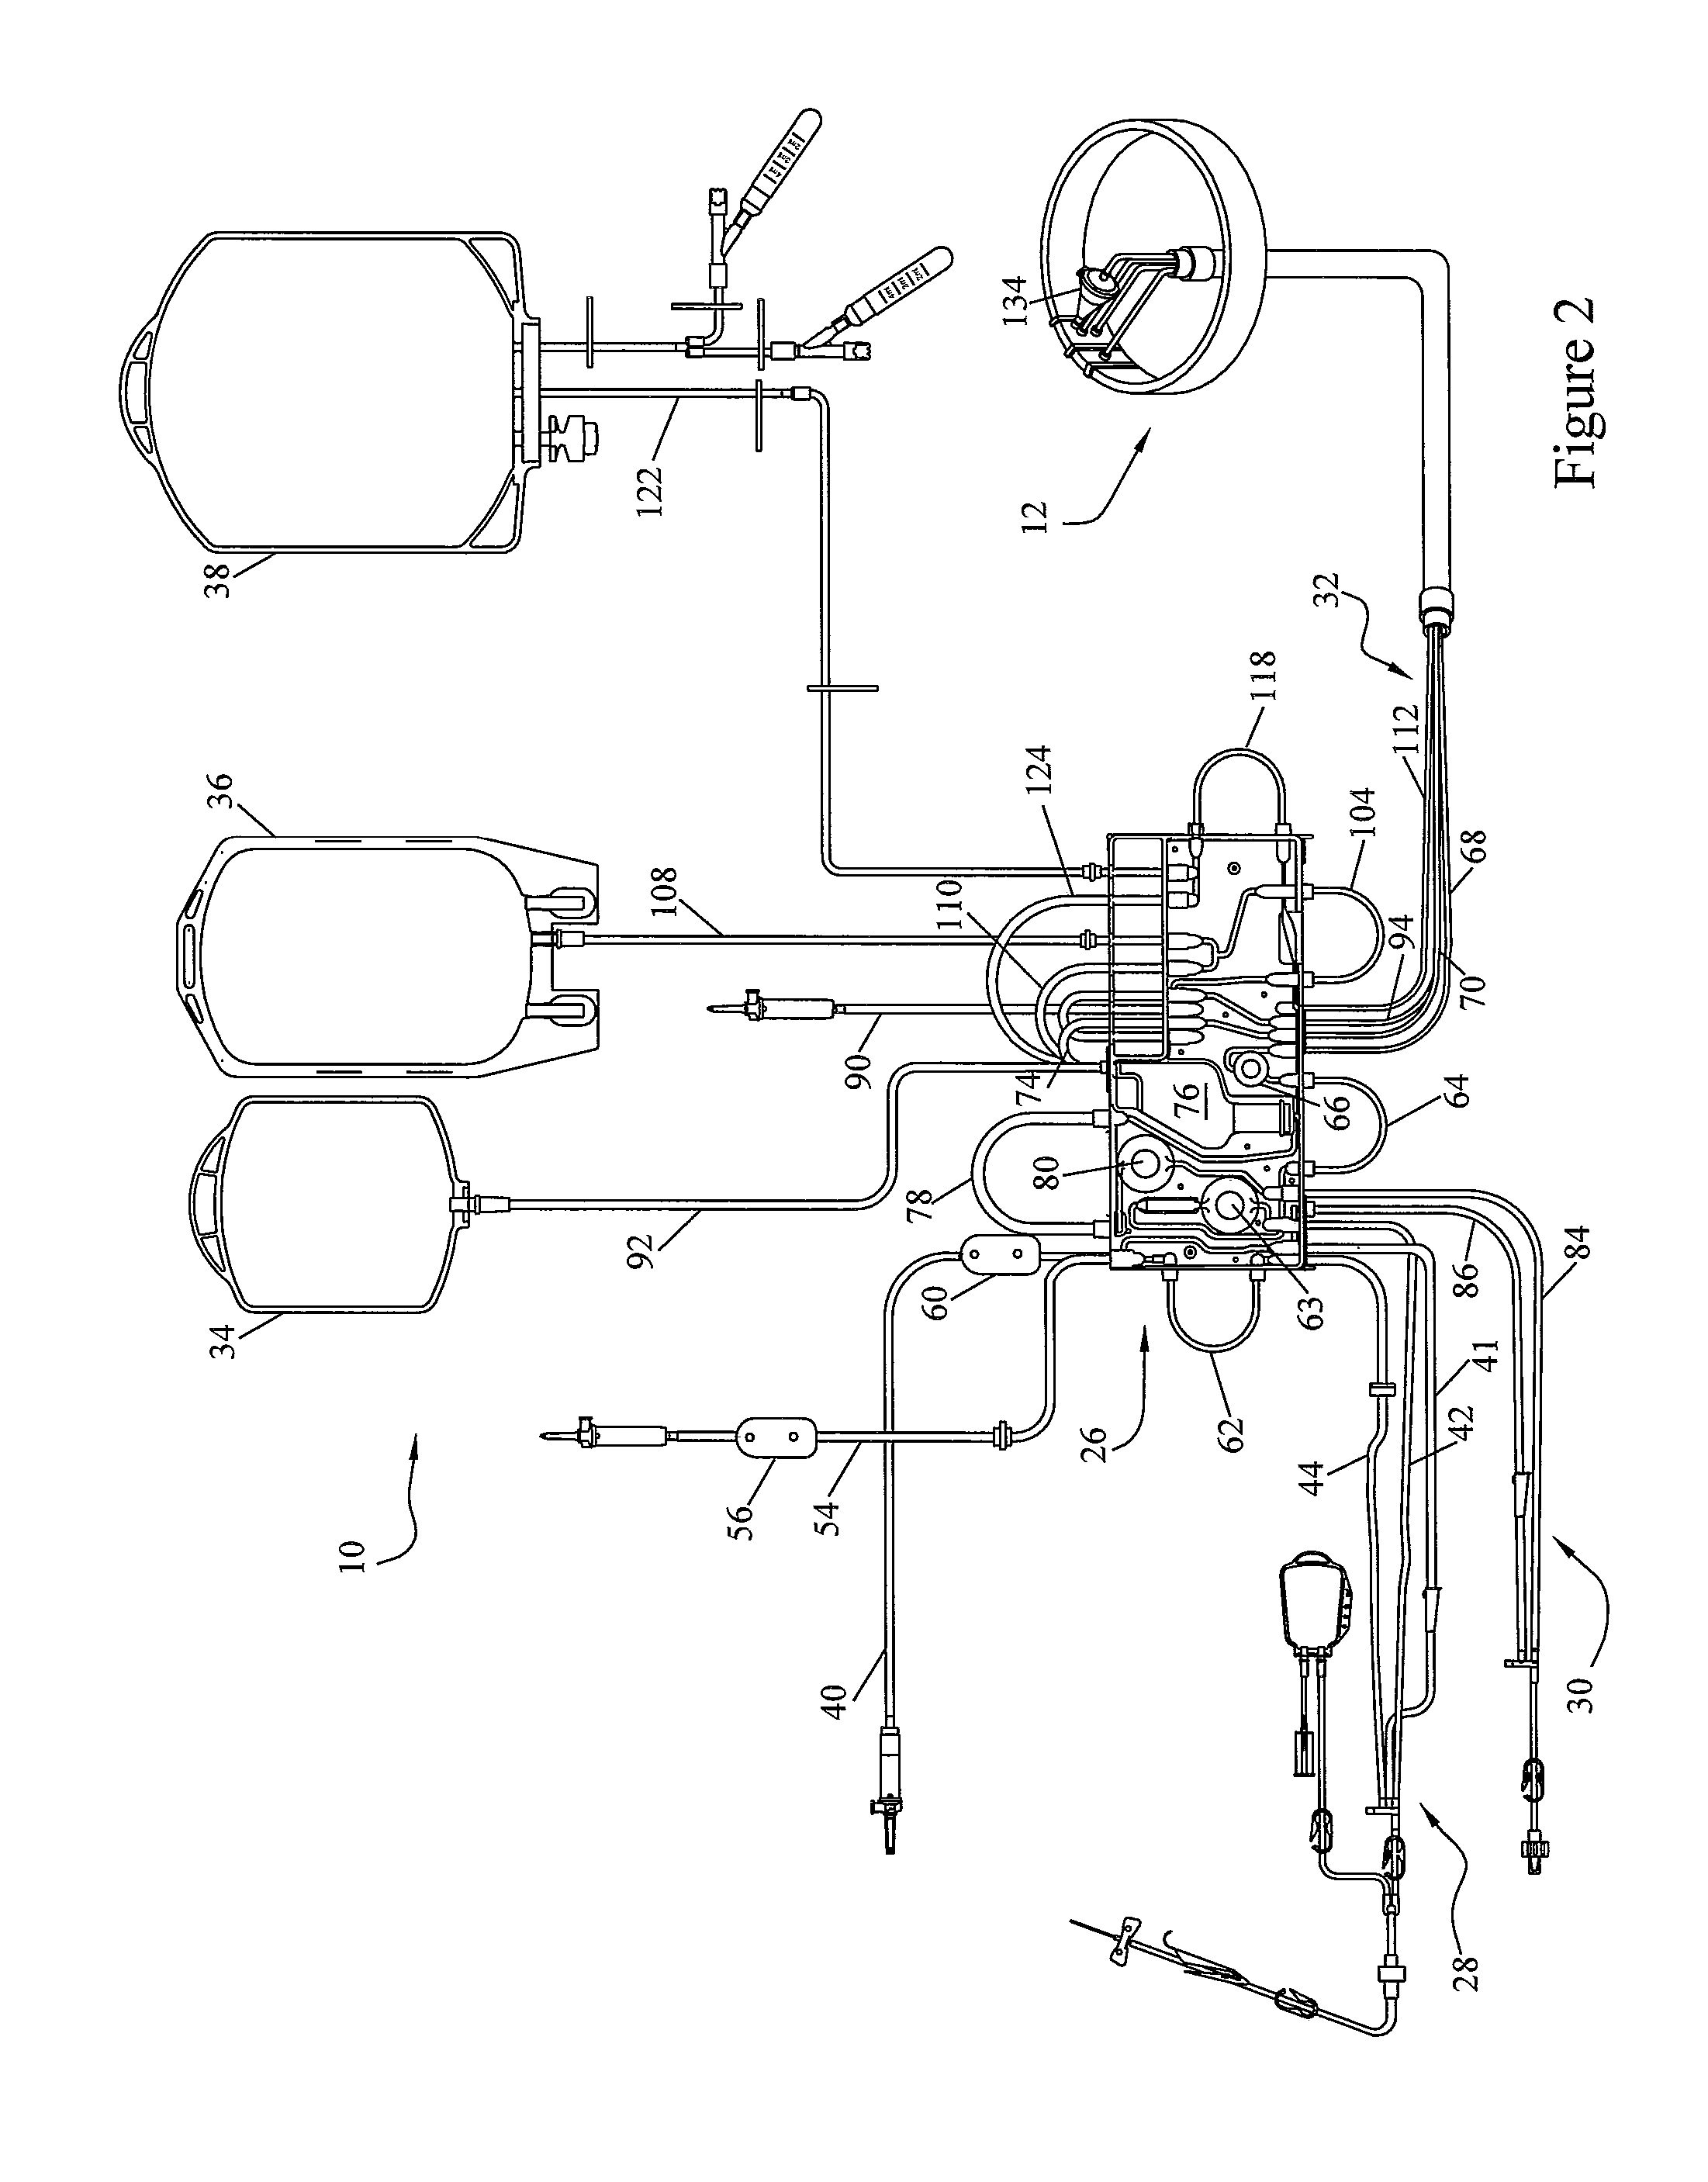 Blood processing apparatus with cell separation chamber with baffles